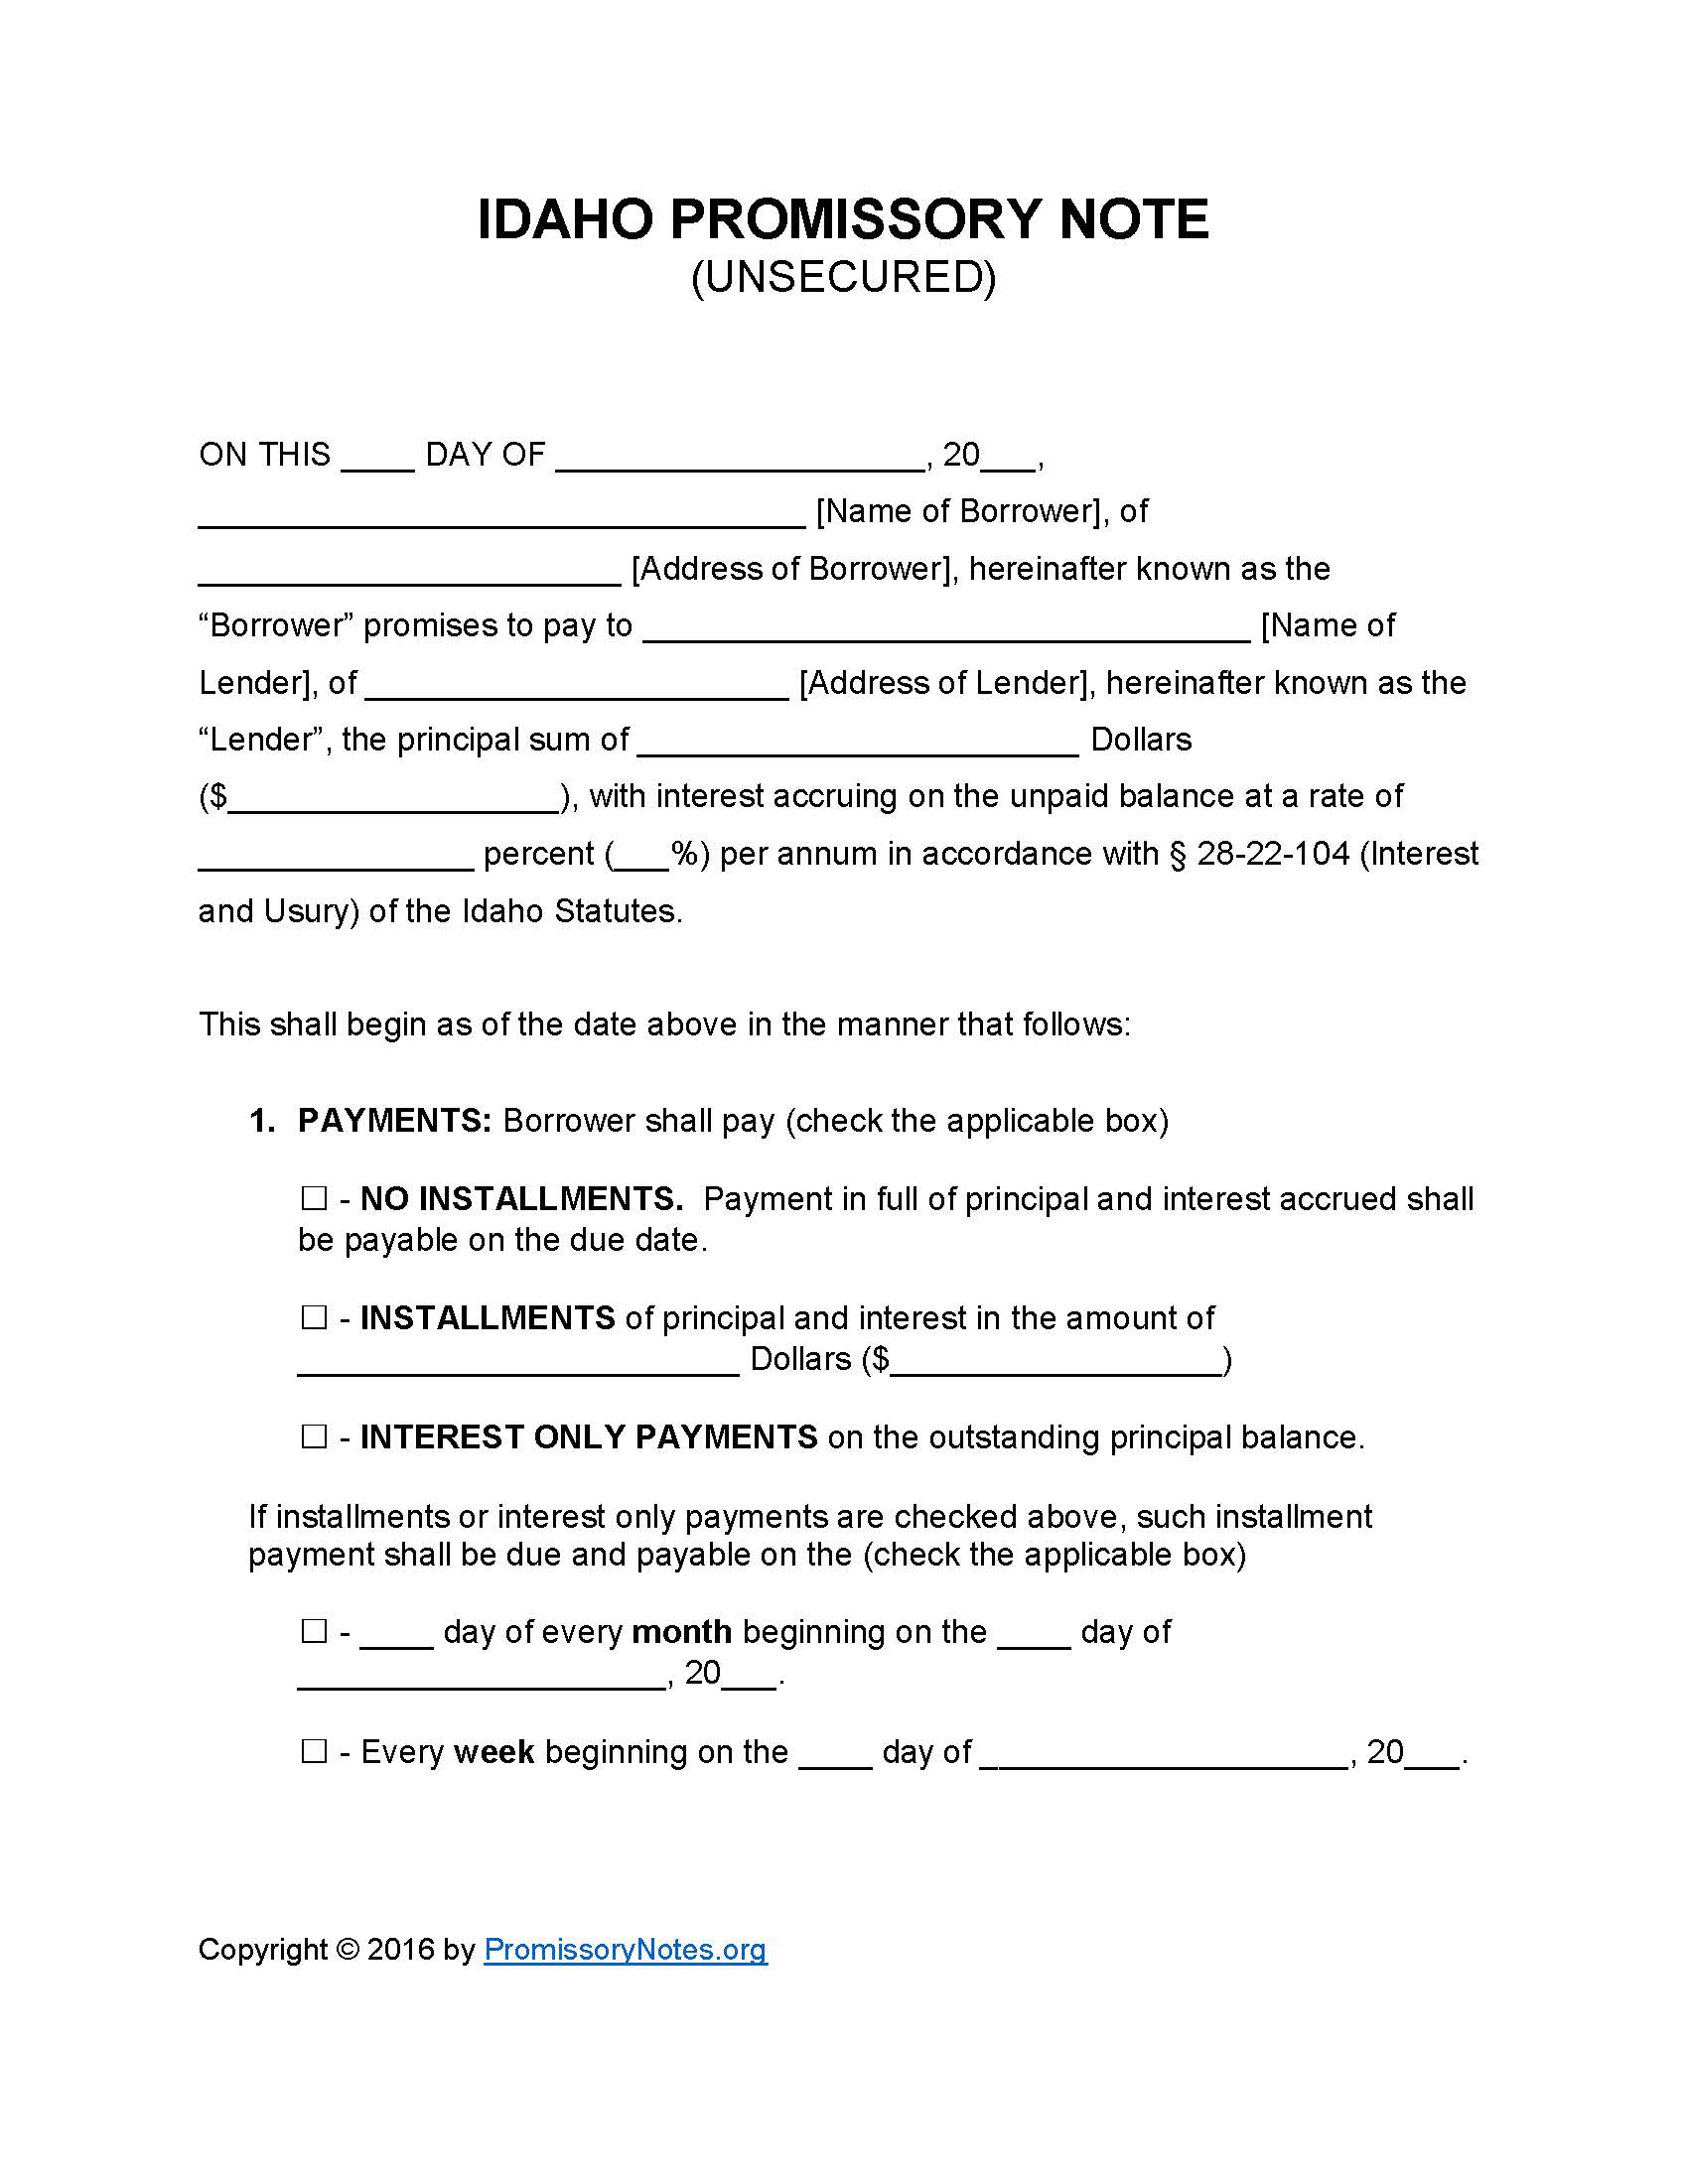 idaho-unsecured-promissory-note-form